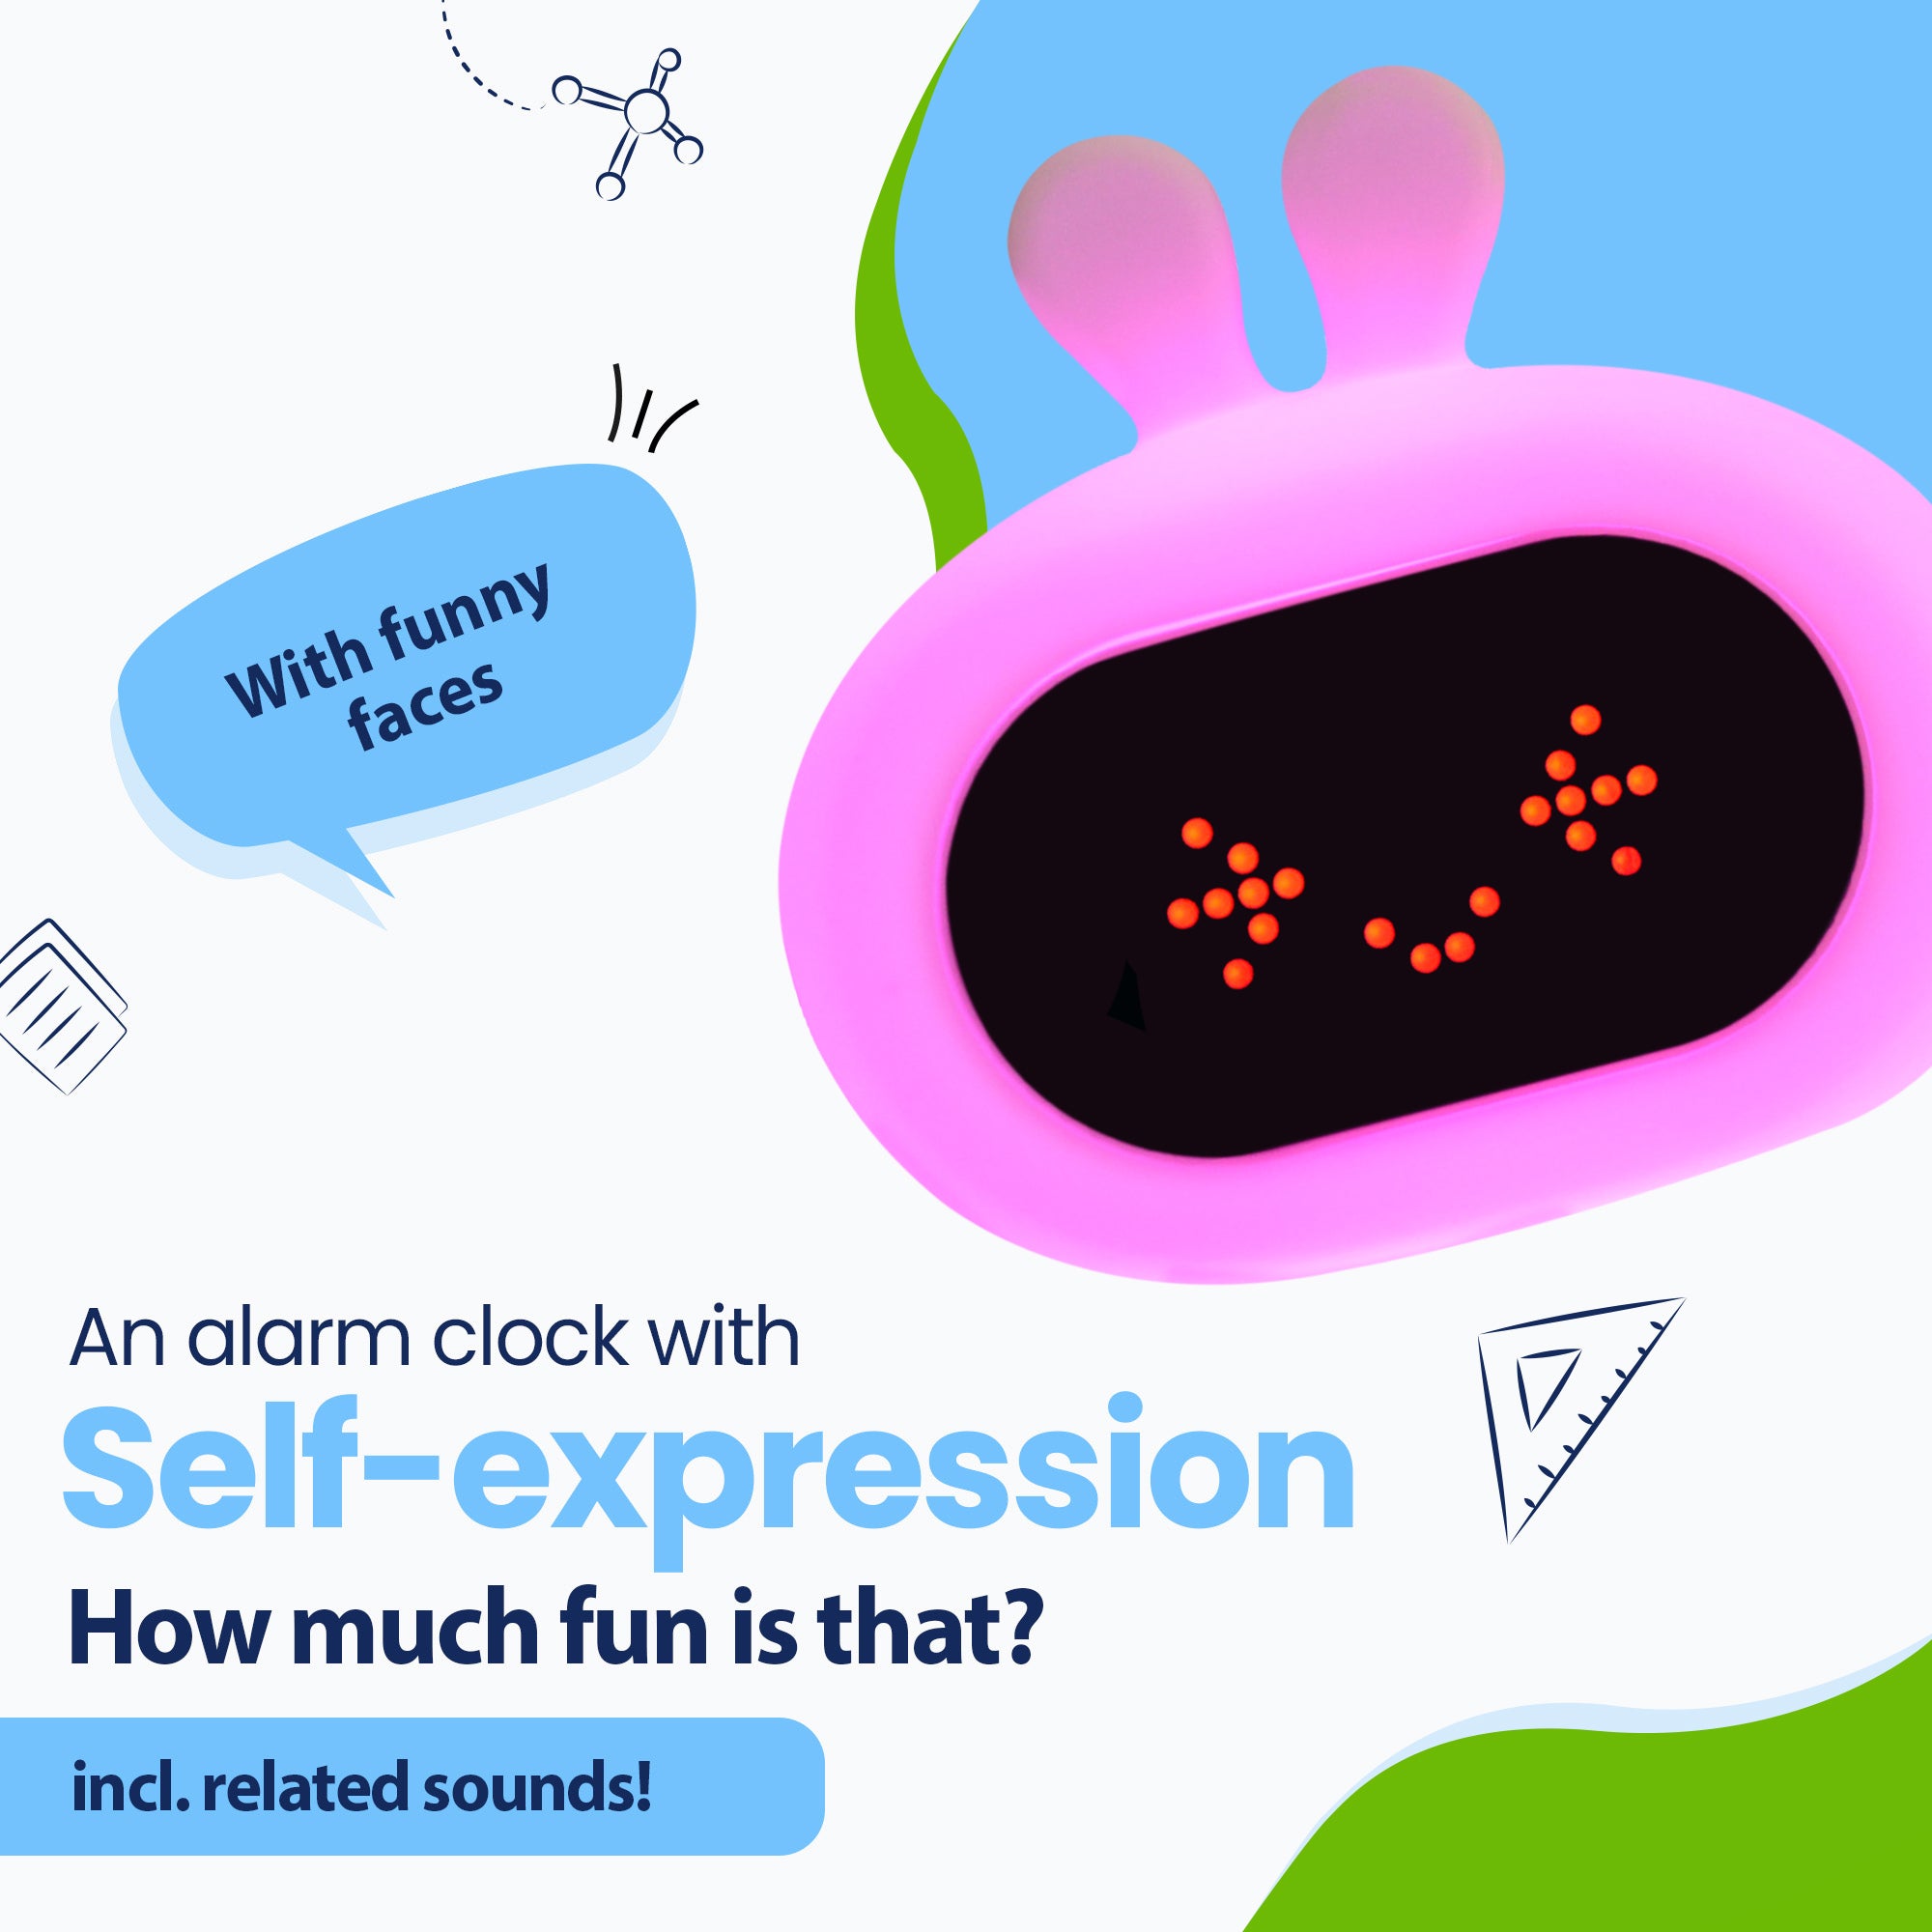 A Bunny alarm clock with emojis and crazy sounds and different colors of light